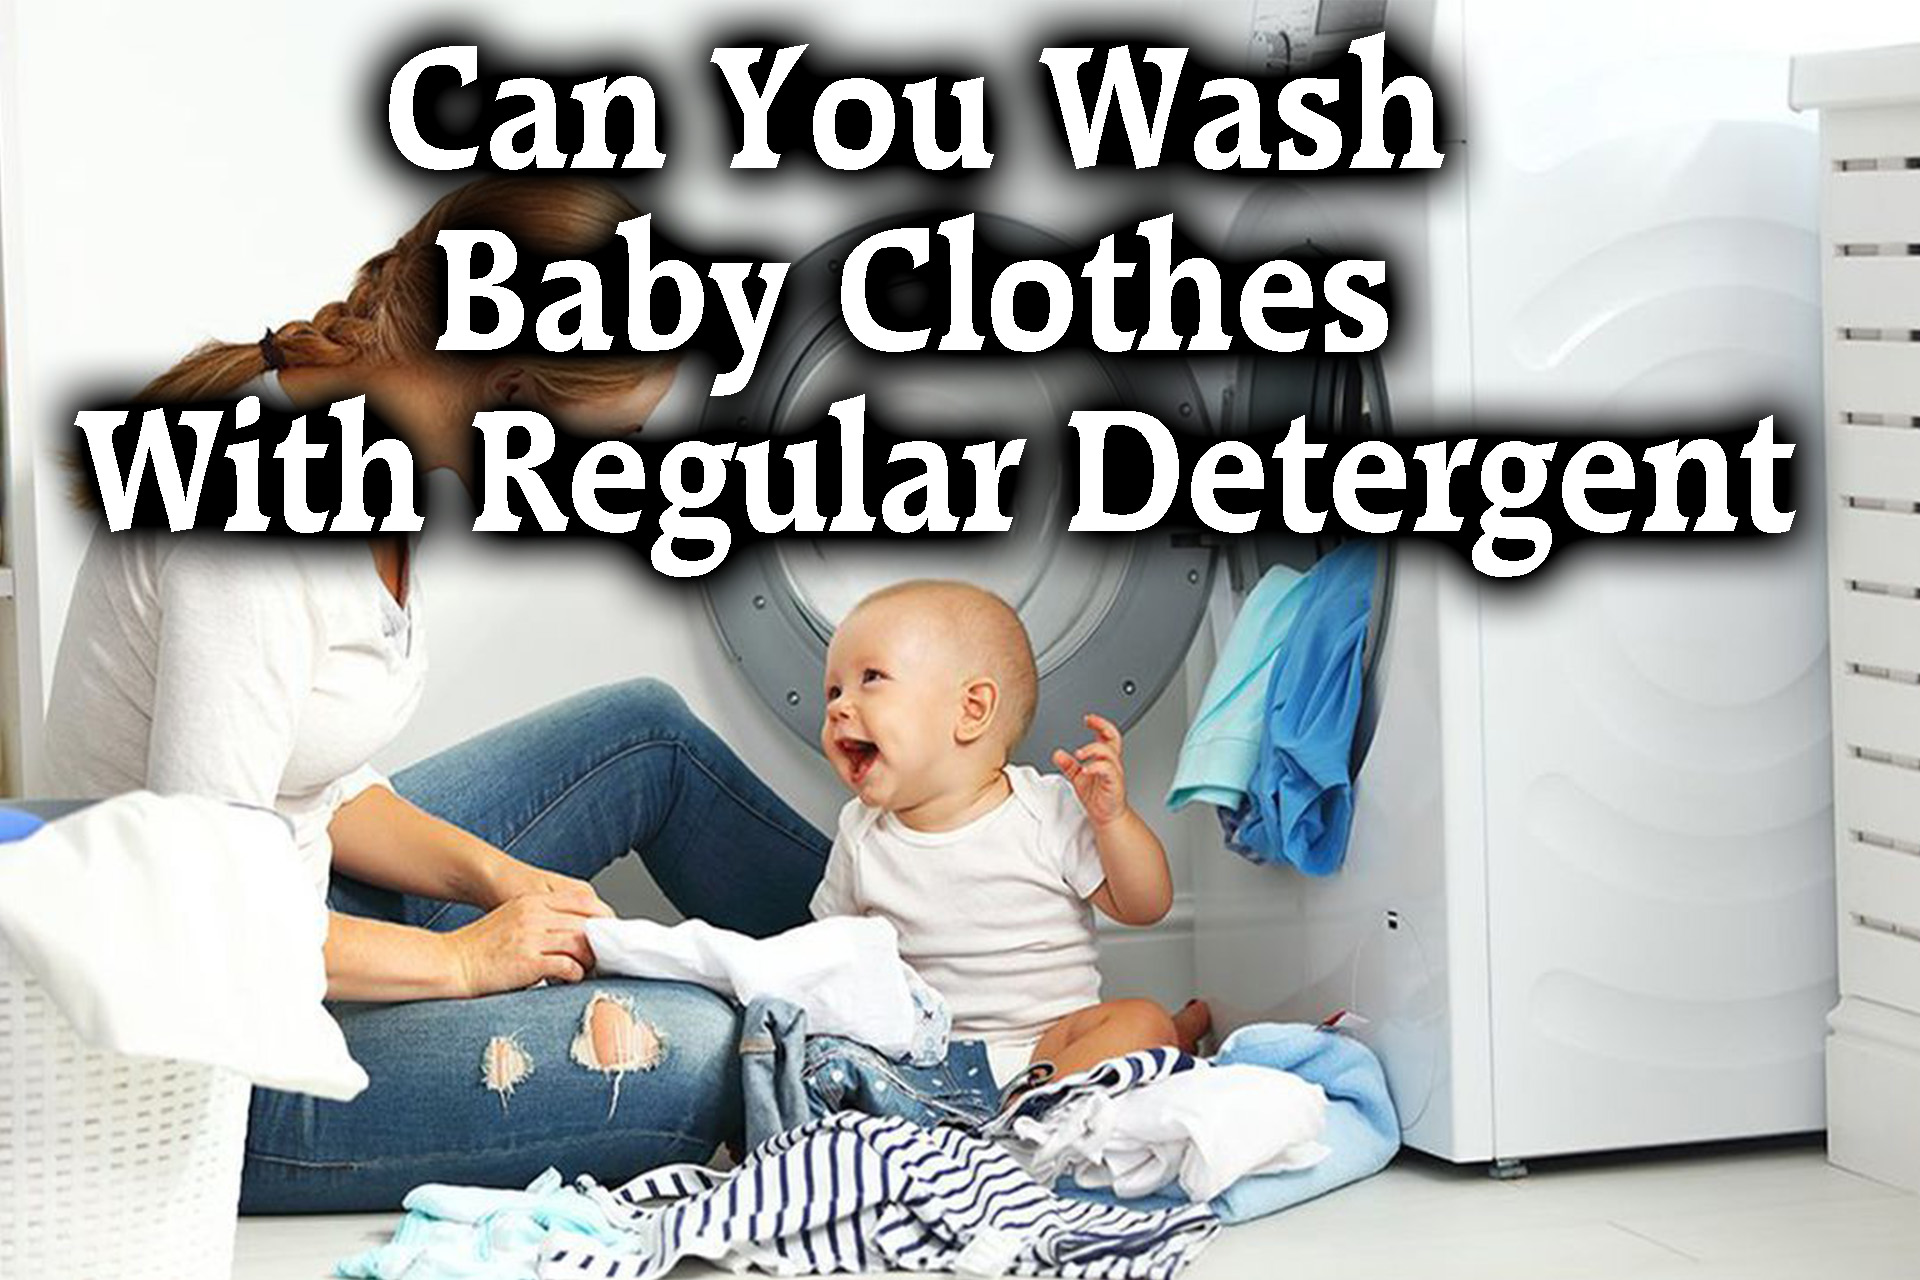 Can You Wash Baby Clothes With Regular Detergent